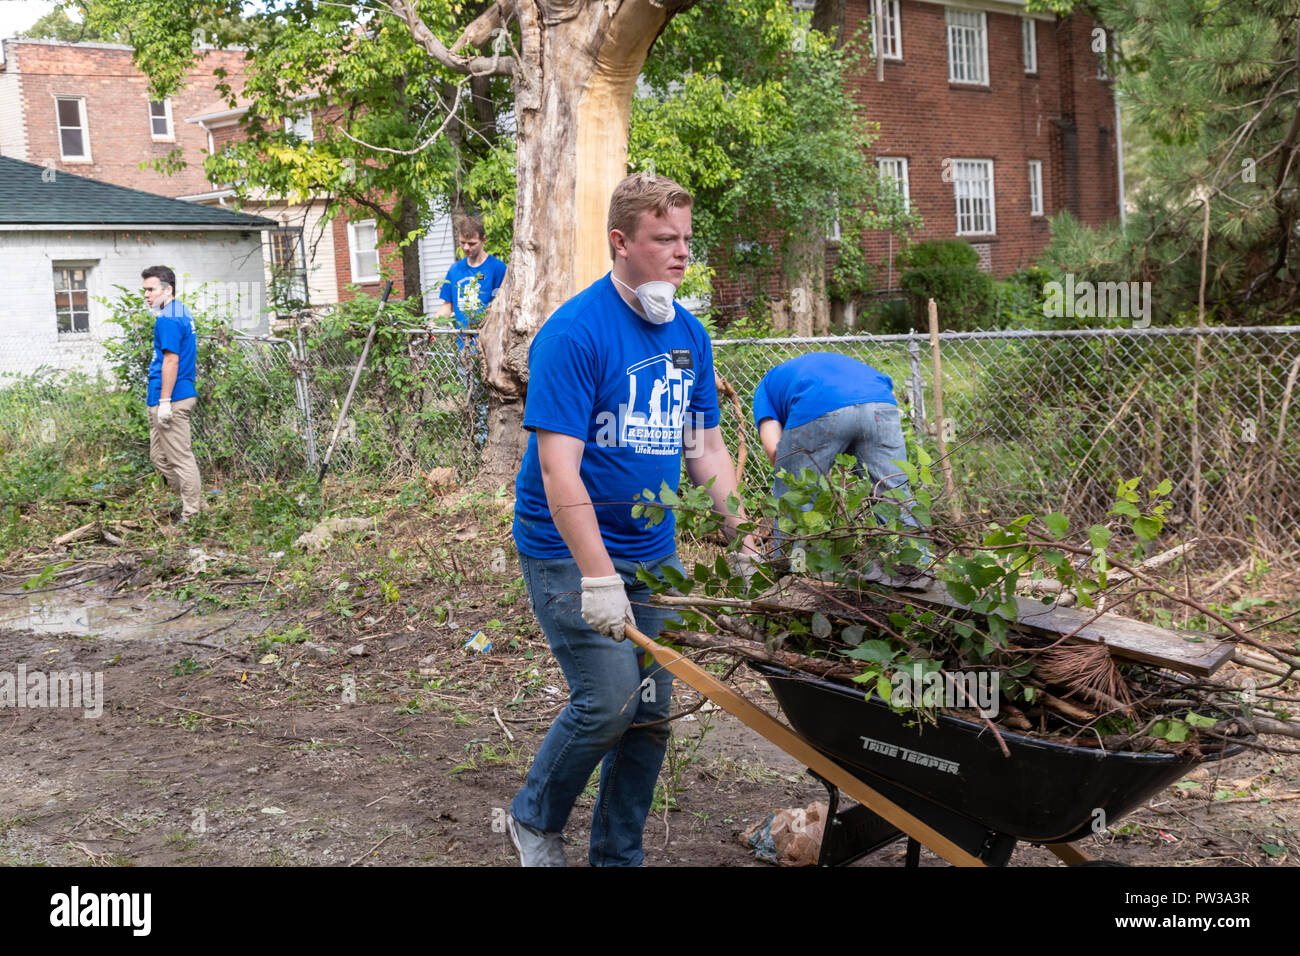 Detroit, Michigan - A Morman missionary joins volunteers cleaning up a distressed neighborhood during a week-long community improvement initiative cal Stock Photo